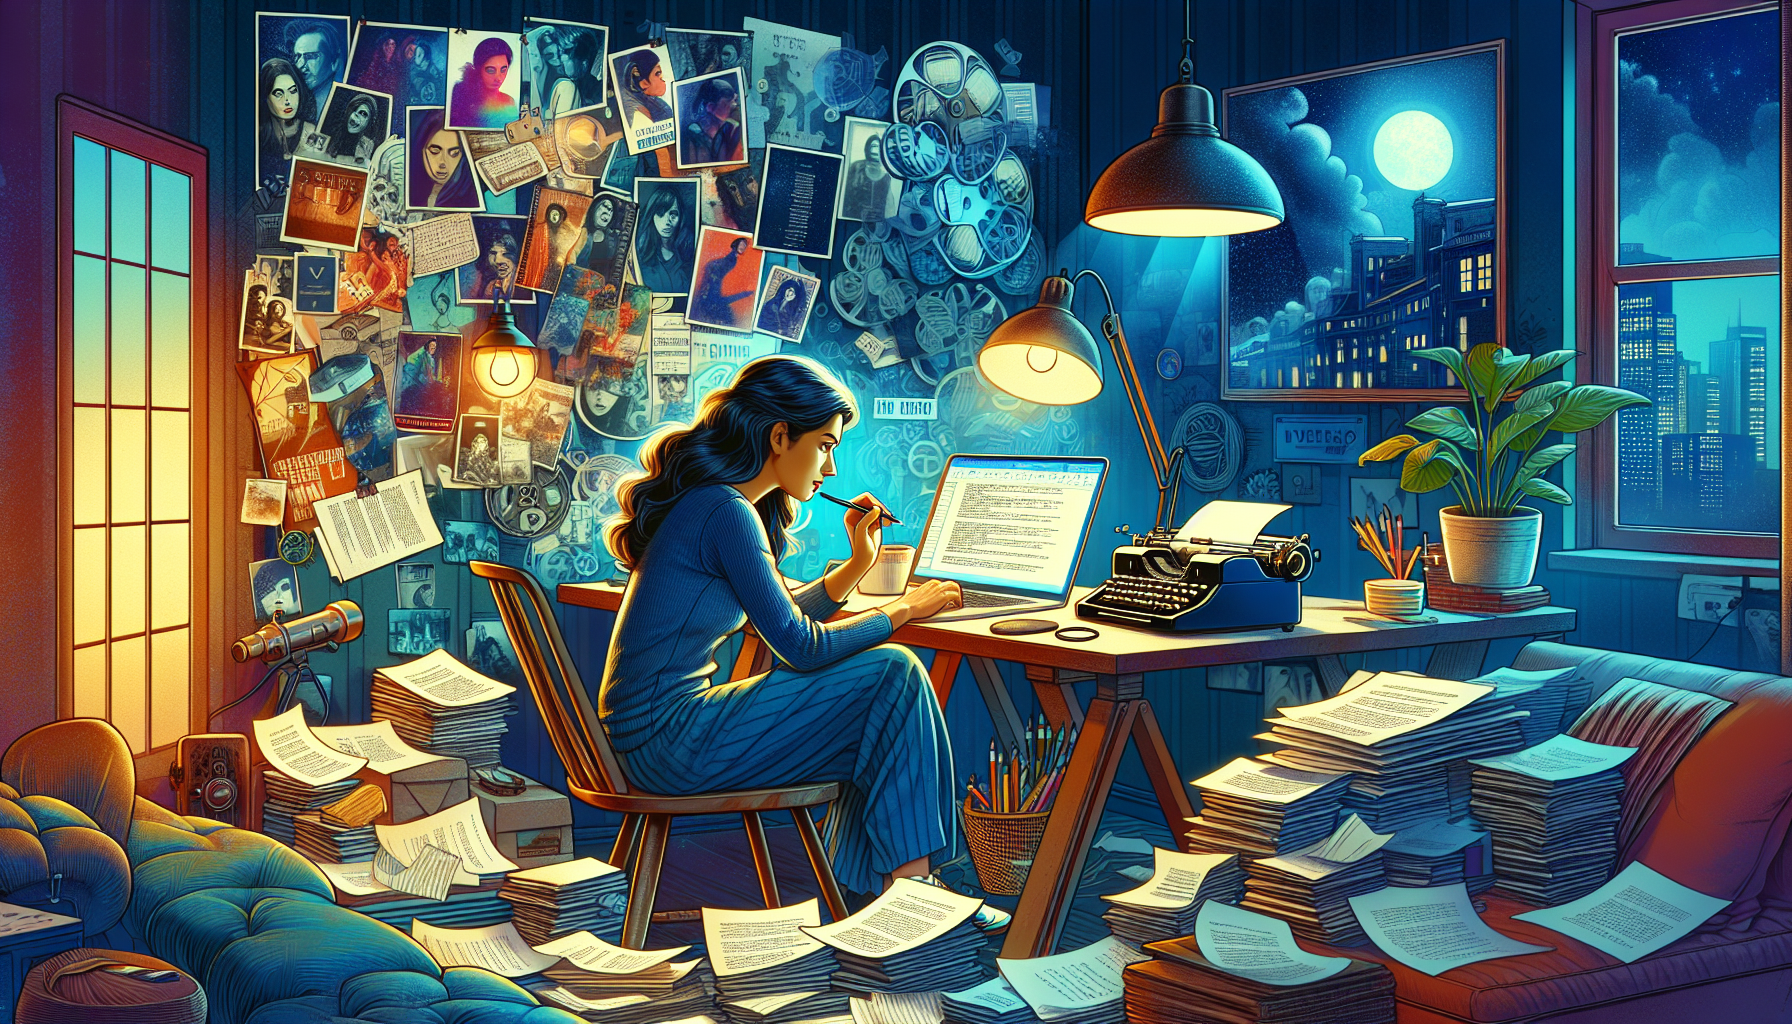 An imaginative workspace loaded with film scripts, a vintage typewriter, scattered draft papers and a mood board, with a focused individual brainstorming and writing, surrounded by film posters and a